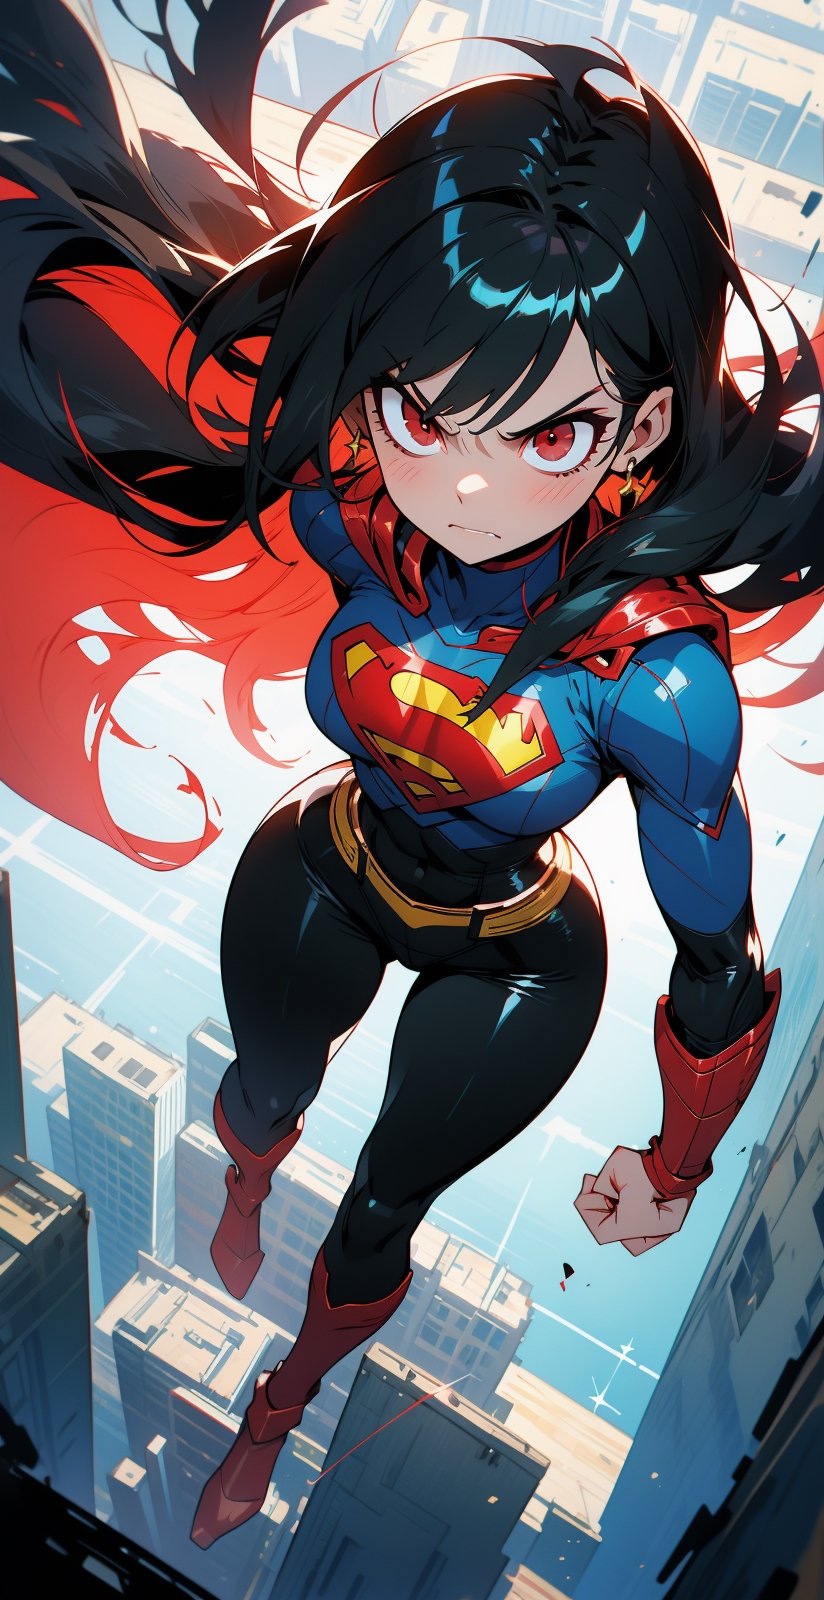 \\Beautiful adult woman\\, supergirl, (red eyes), ((black hair)), torn cape, long_hair:1.3, bangs, hourglass body shape, detailed eyes, normal breasts quality, evil smirk, slim waist, (slim thick body), ((full-body)), (angry look), perfect hands, in a spartan thick armor, ruined city, surrounded by death, fire around, dark colors, sad colors, space hair, levitating, sky, zero gravity, above city, view from above looking down, depth_of_field